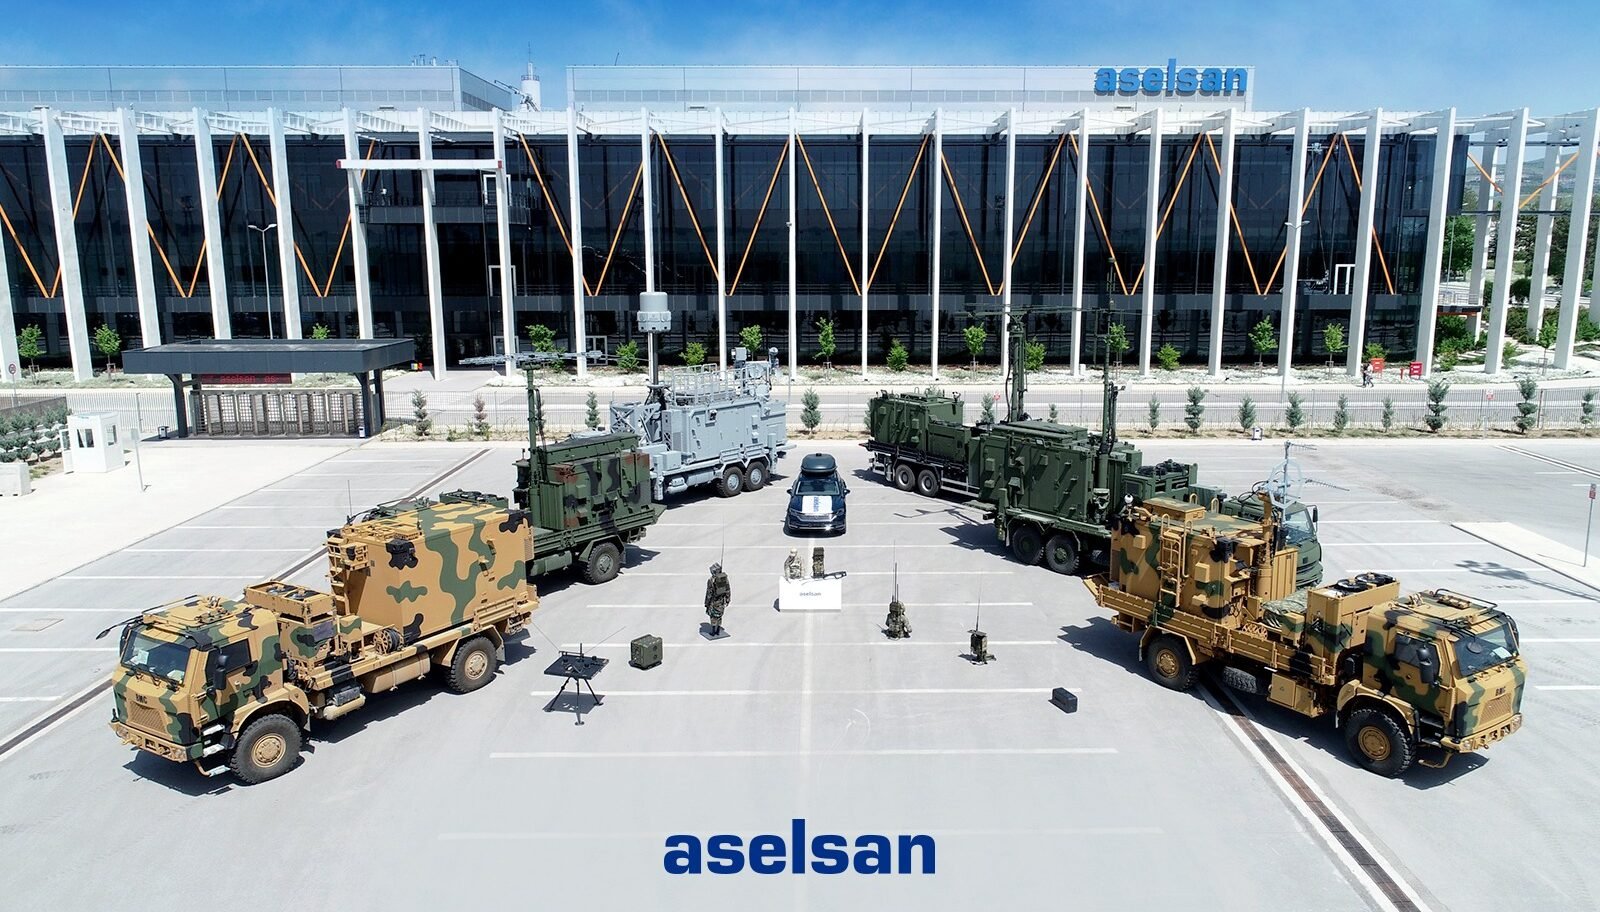 ASELSAN GOES ON A JOURNEY OF INNOVATION